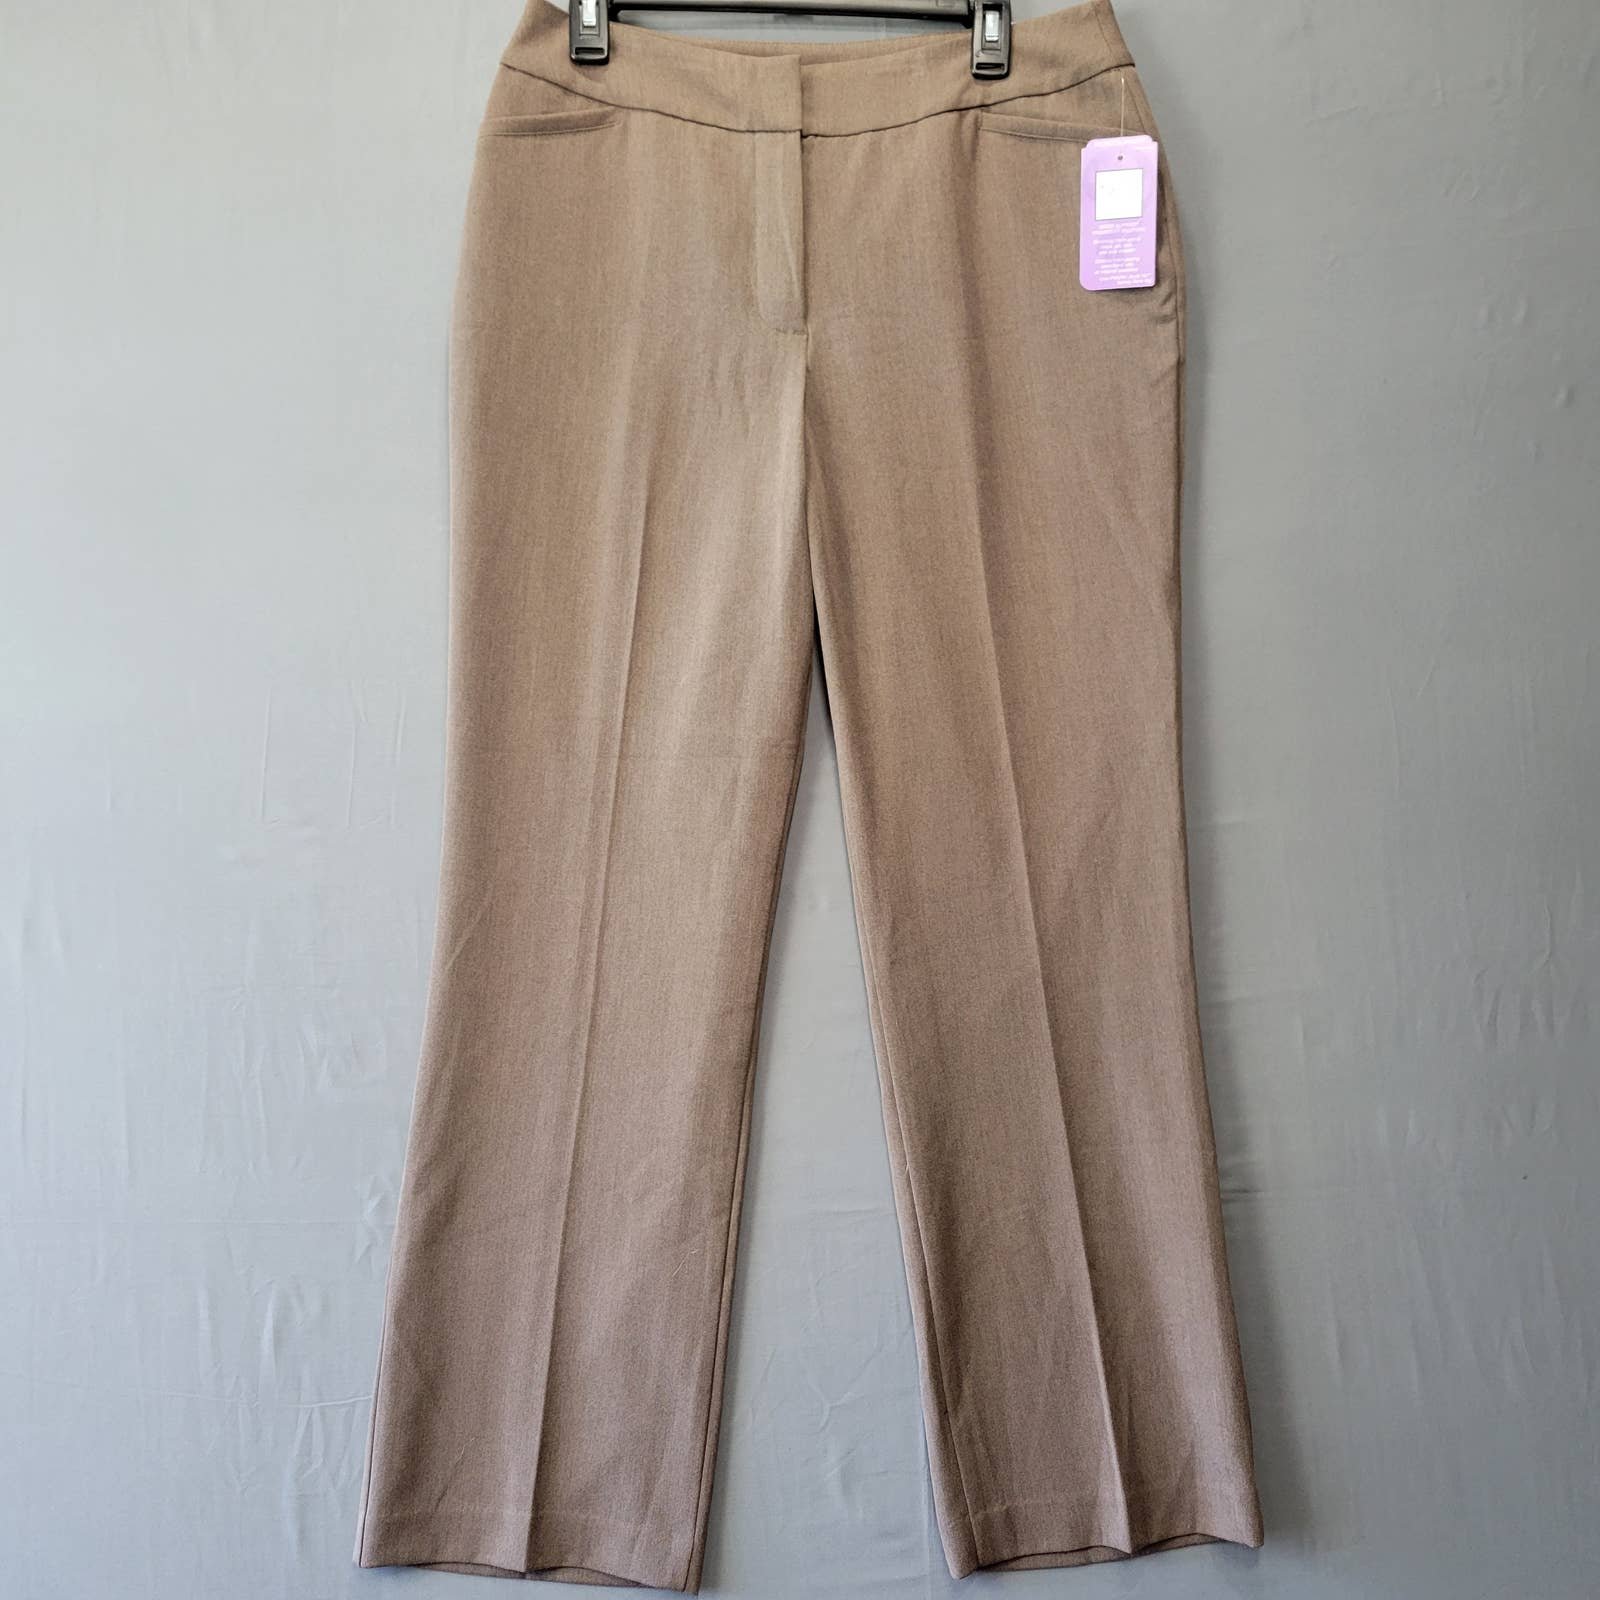 cheapest place to buy  Investments Pants Womens Size 10